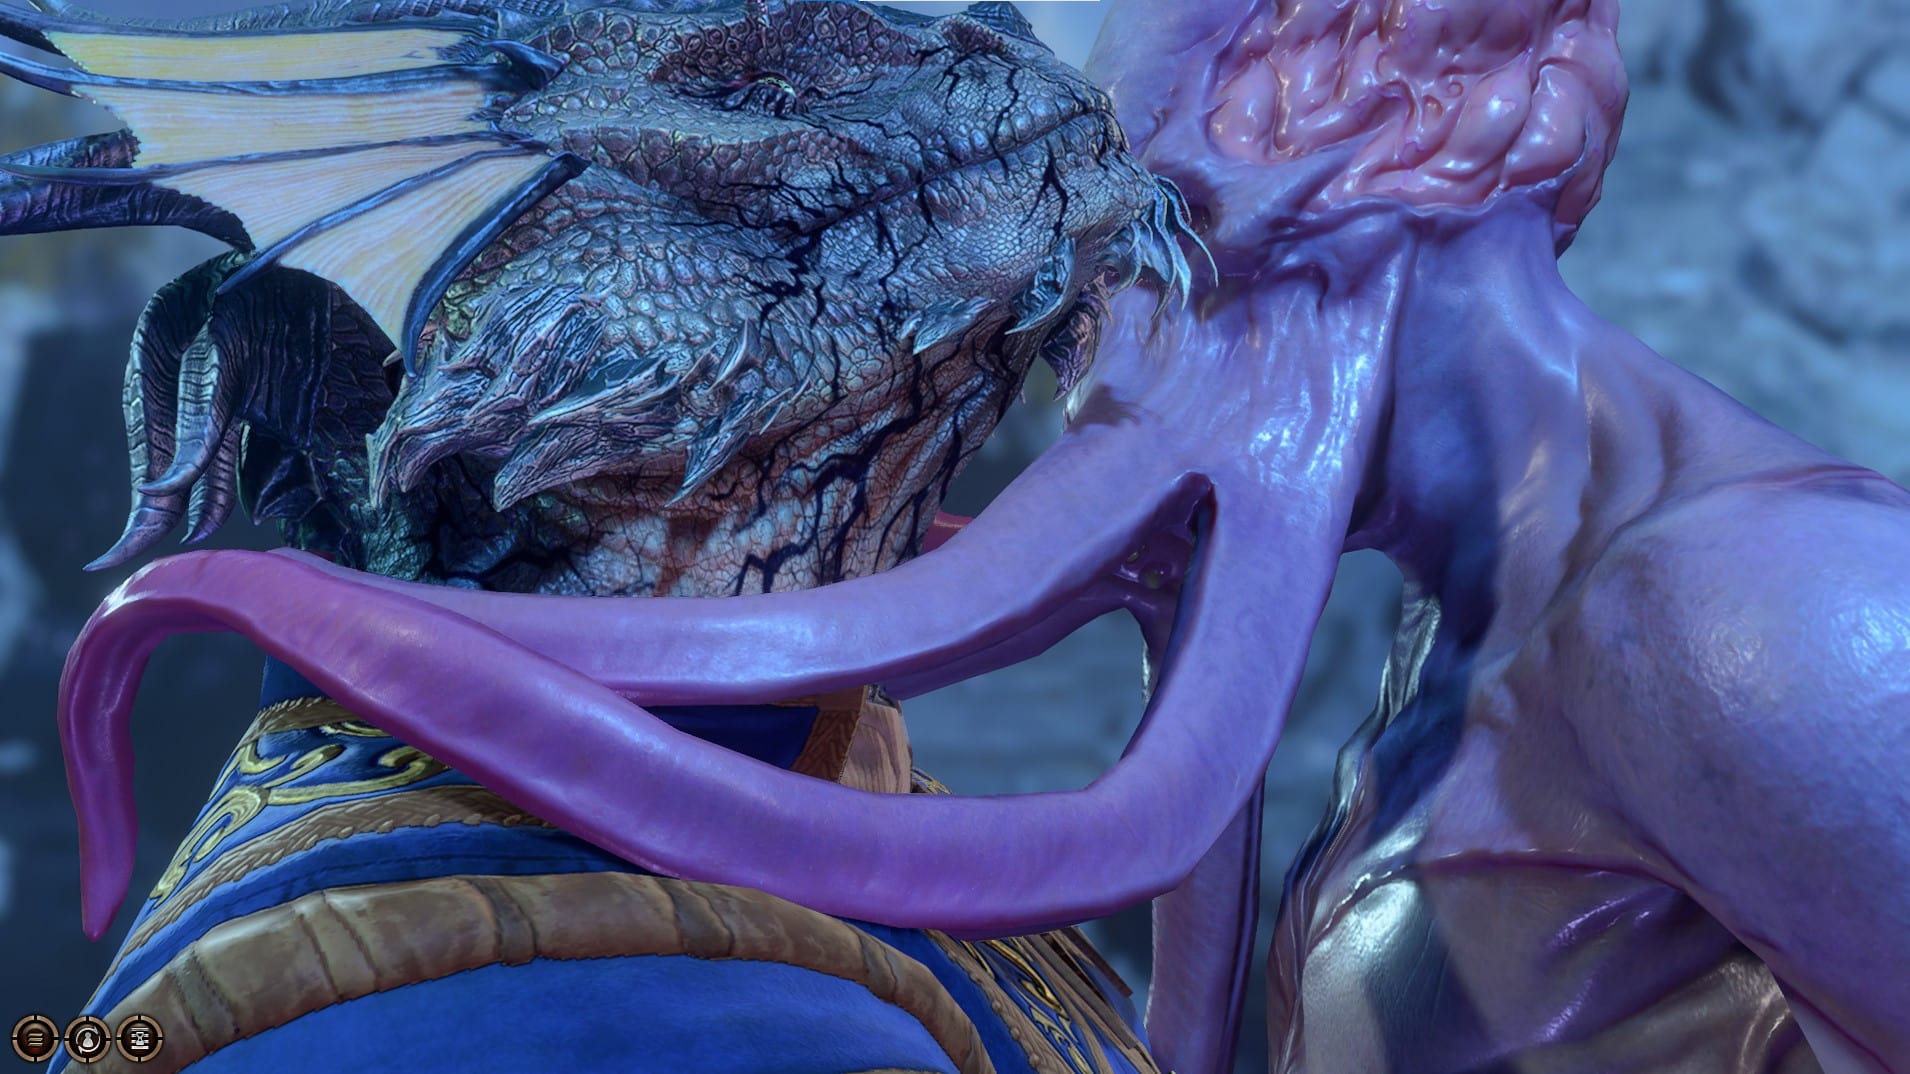 Screenshot of Tav the dragonborn Warlock and The Emperor the Mindflayer embracing romantically with the latter's tentacles wrapped around the former's neck